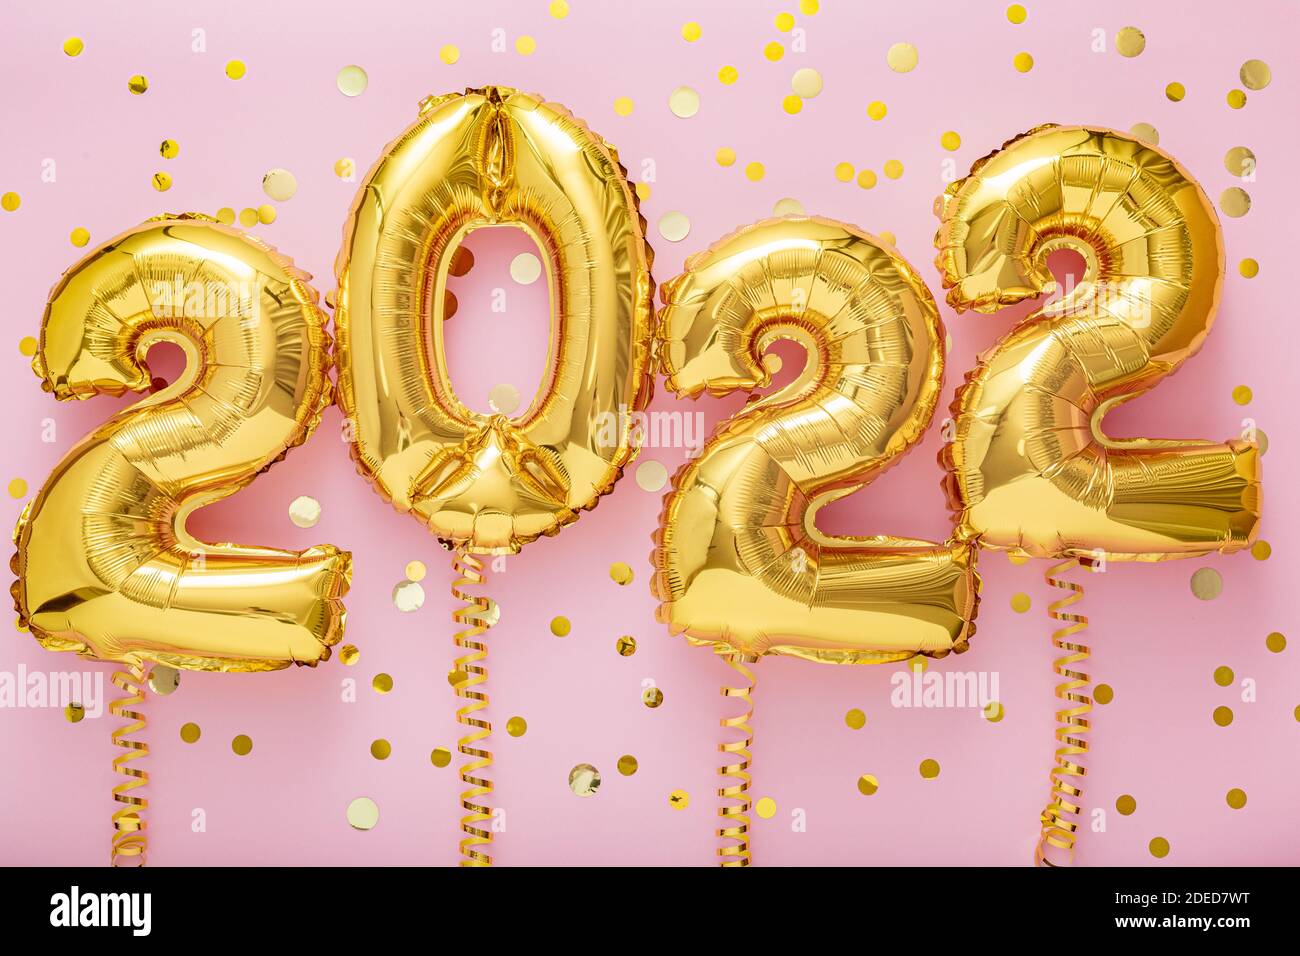 2022 year gold balloons on ribbons with confetti on pink wall. Happy New year 2022 eve celebration Stock Photo